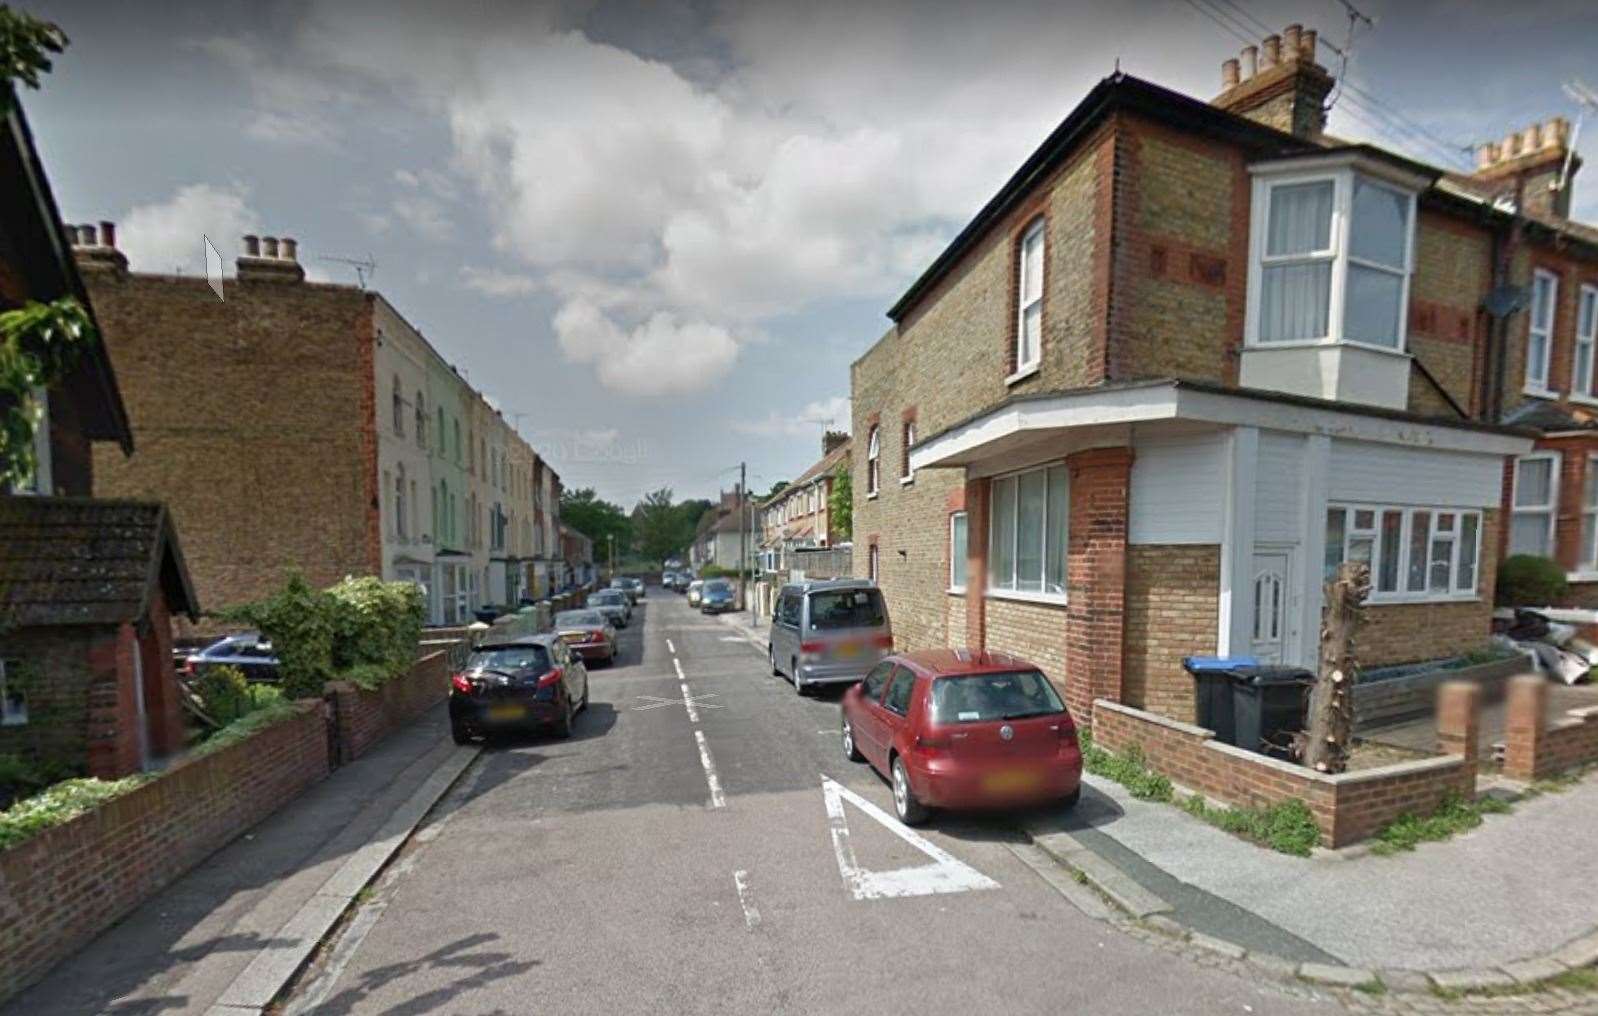 The incident took place in Leopold Road, Ramsgate